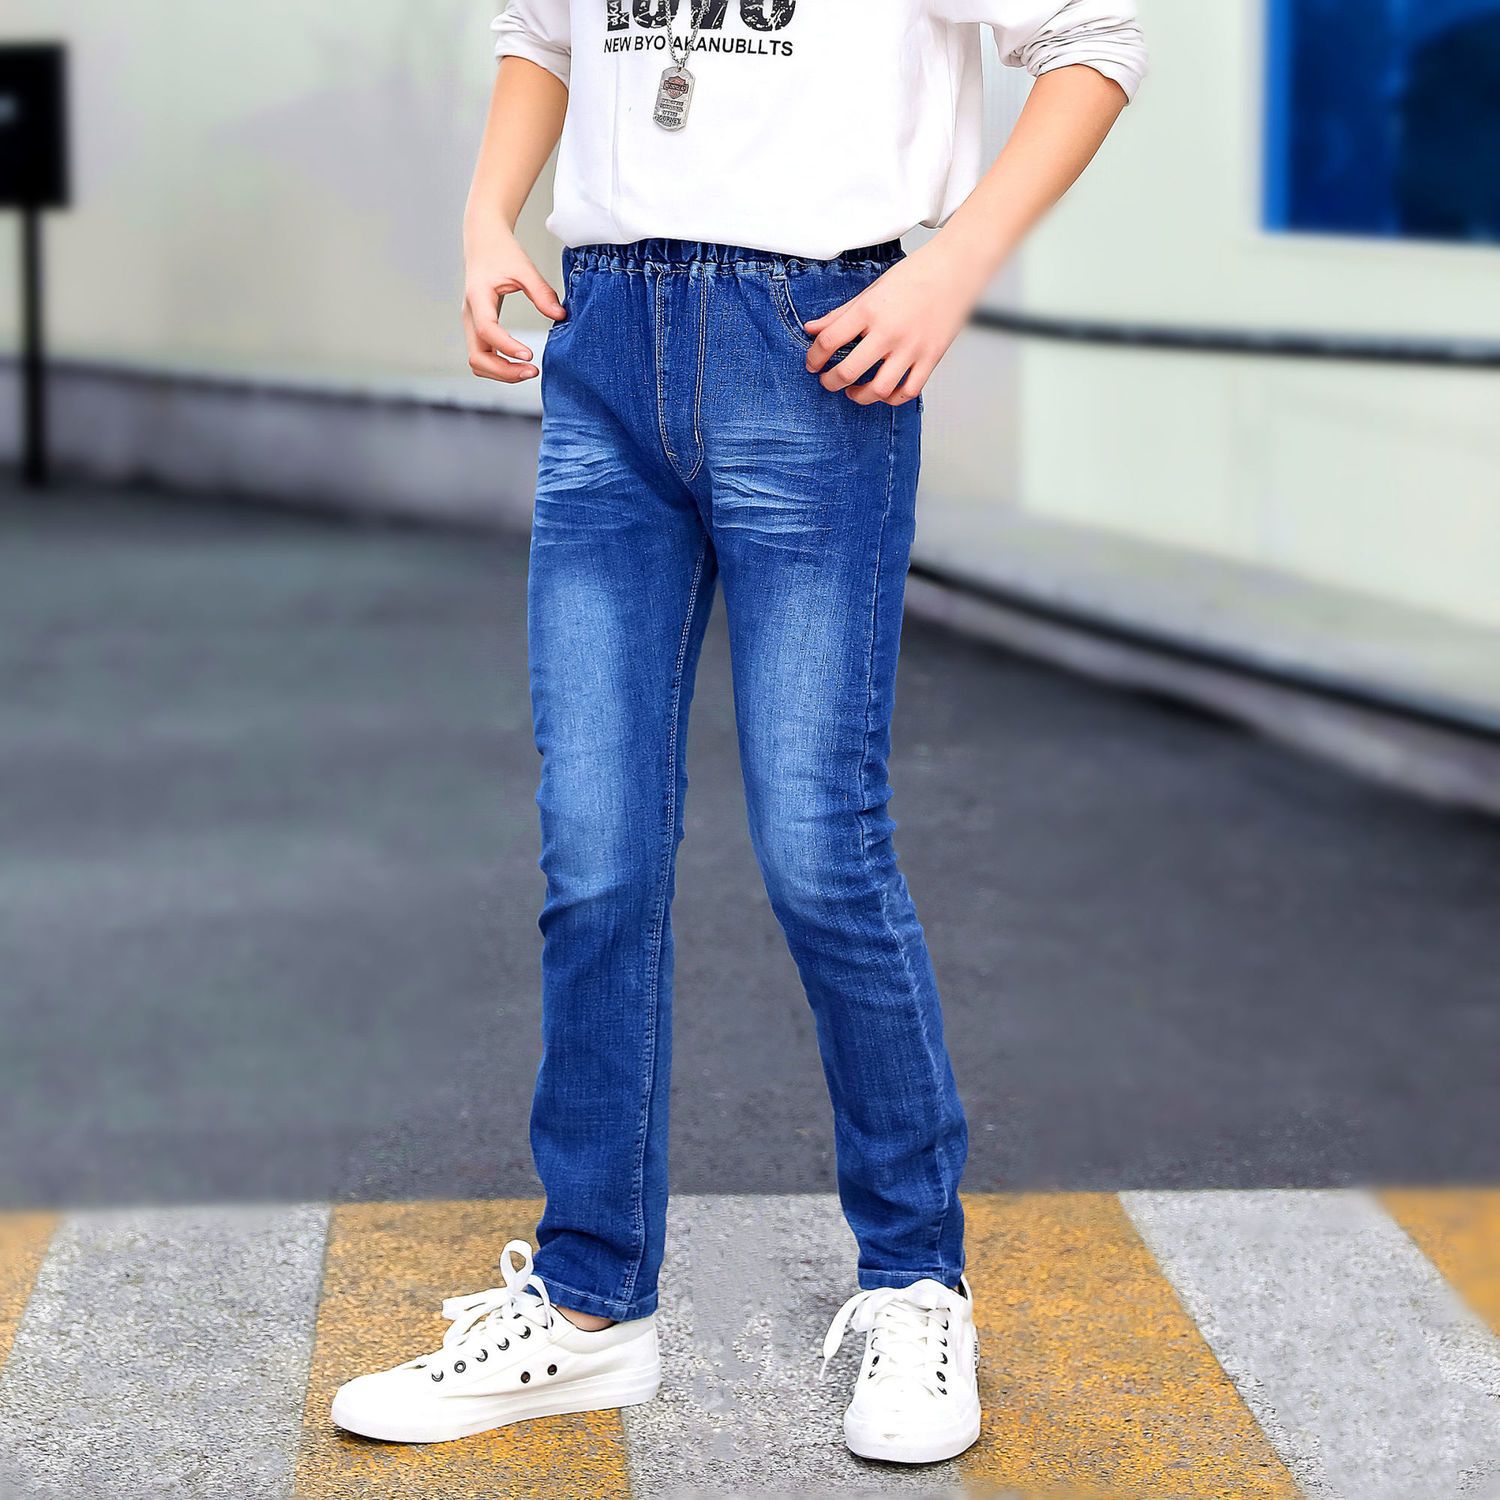 Boys' jeans spring and autumn 2023 new style medium and large boys junior high school students primary school students loose straight casual pants